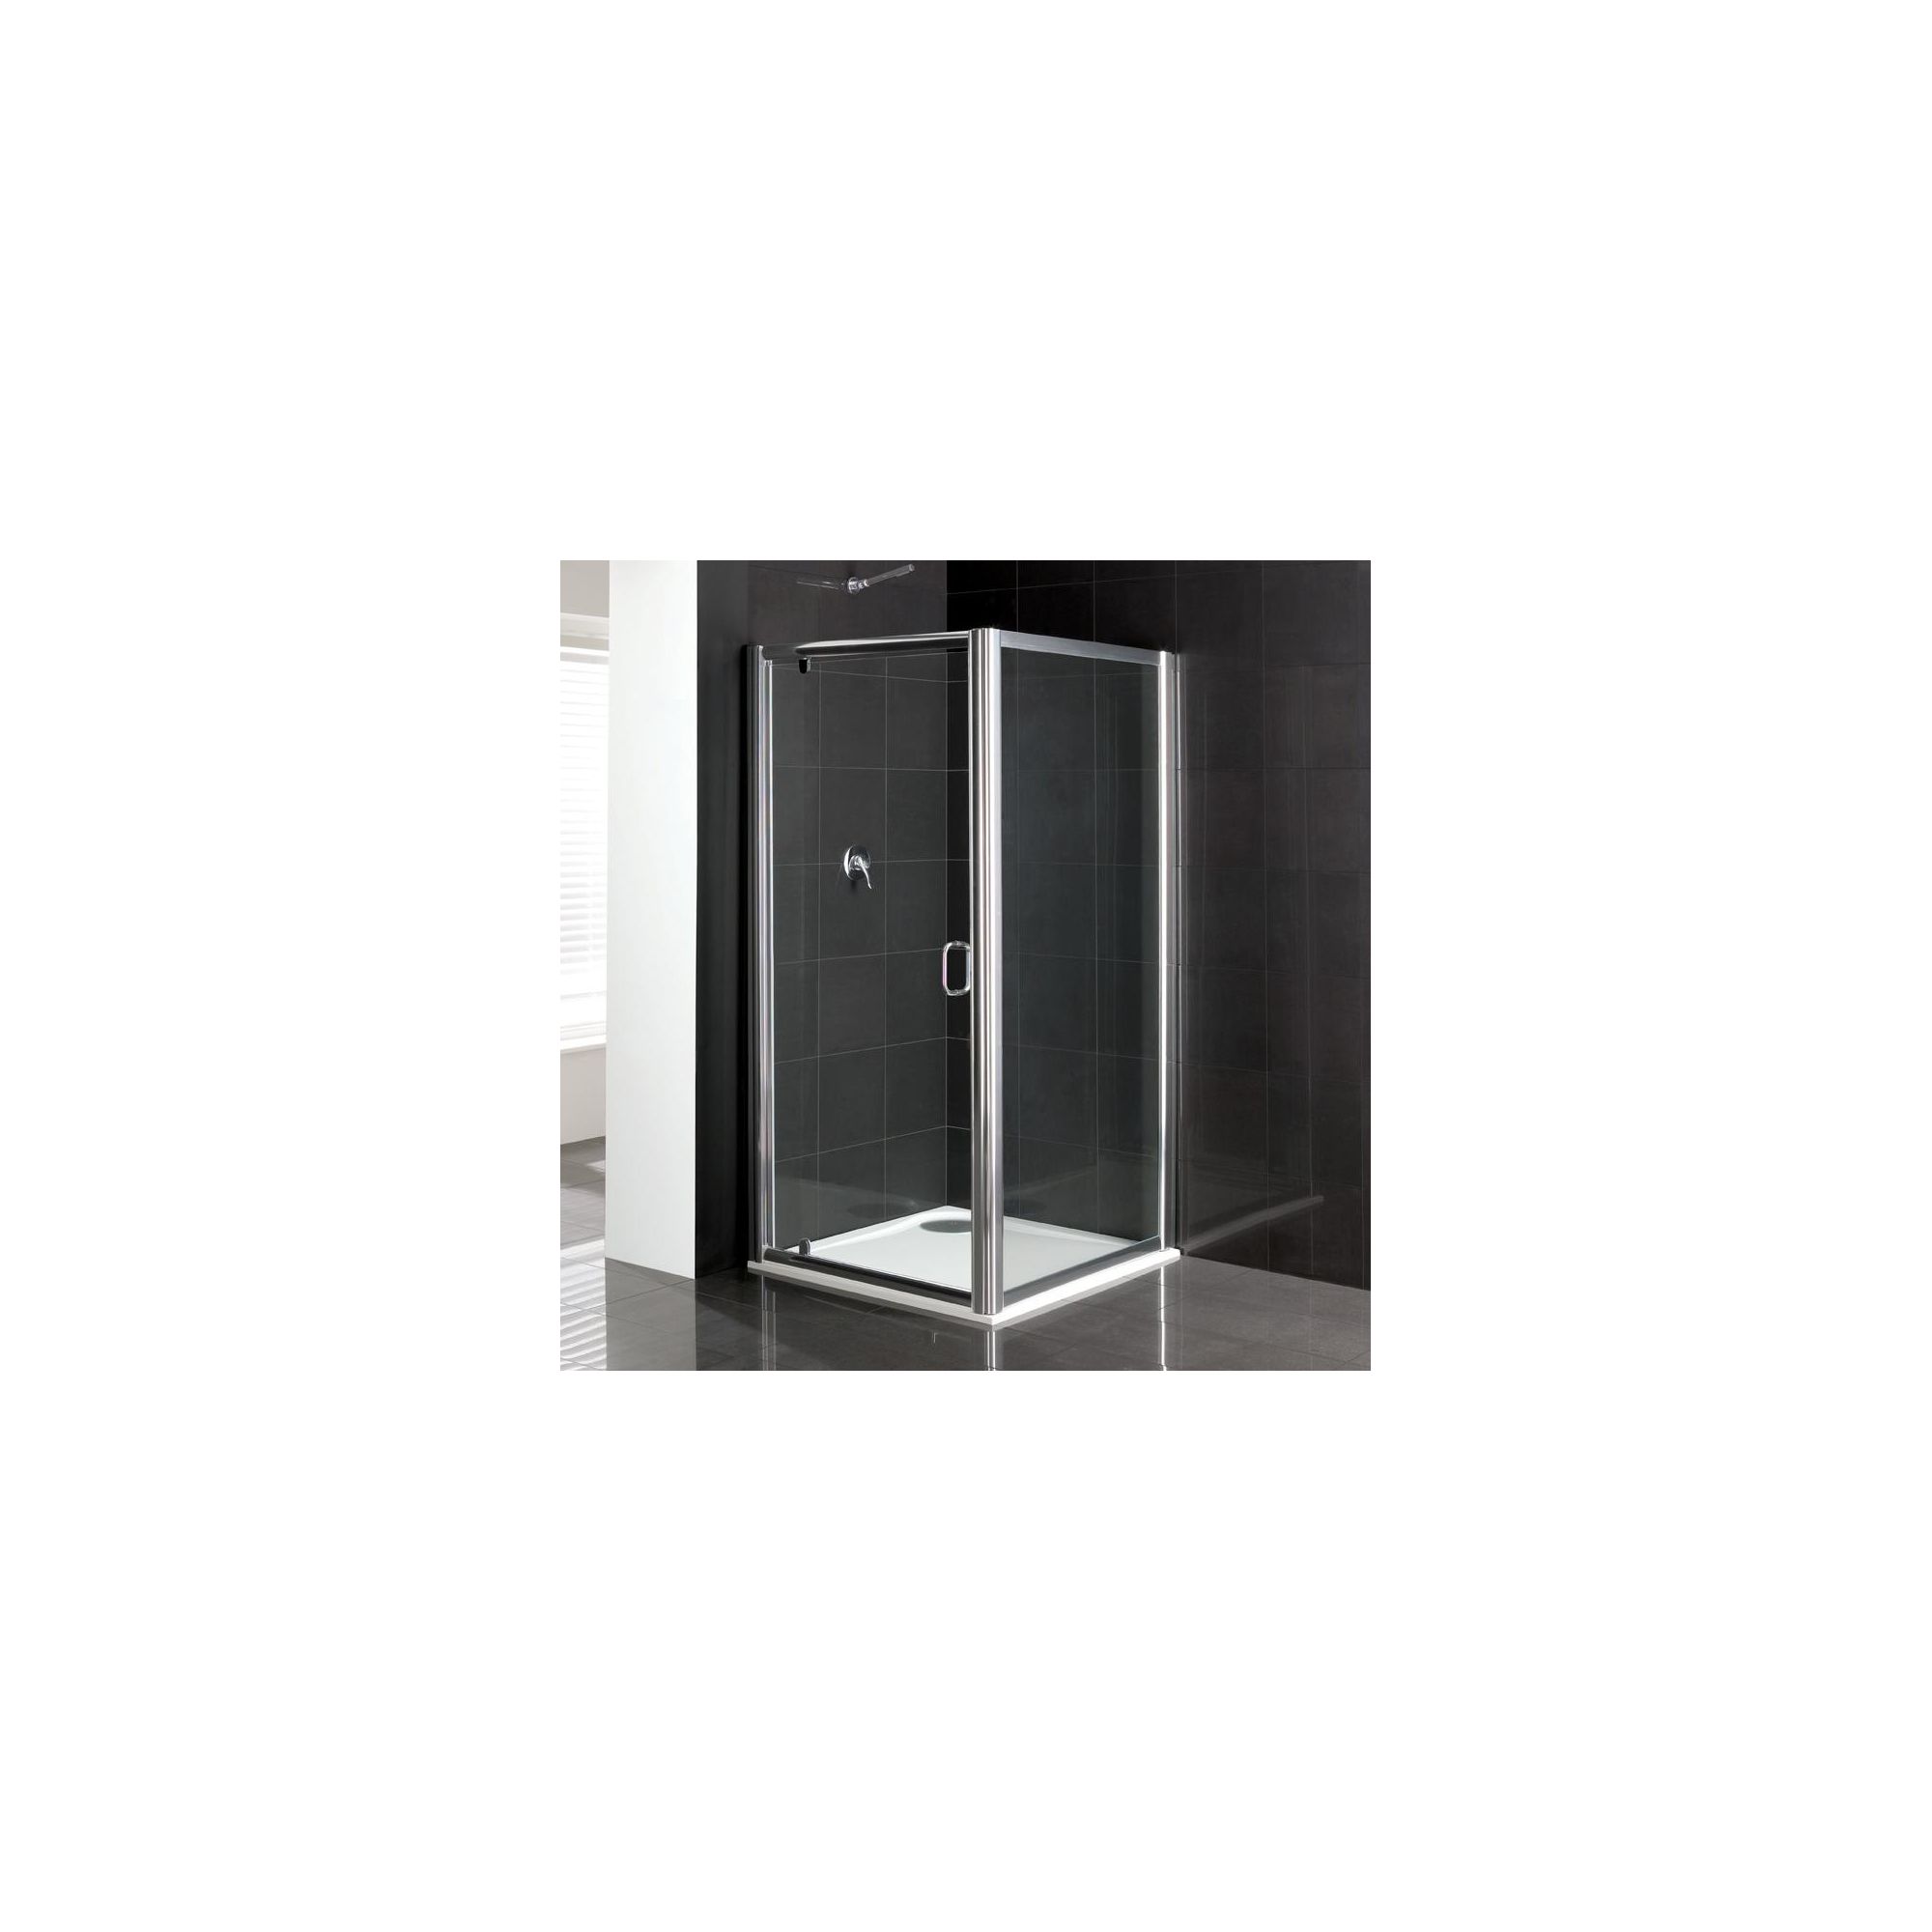 Duchy Elite Silver Pivot Door Shower Enclosure with Towel Rail, 800mm x 800mm, Standard Tray, 6mm Glass at Tesco Direct